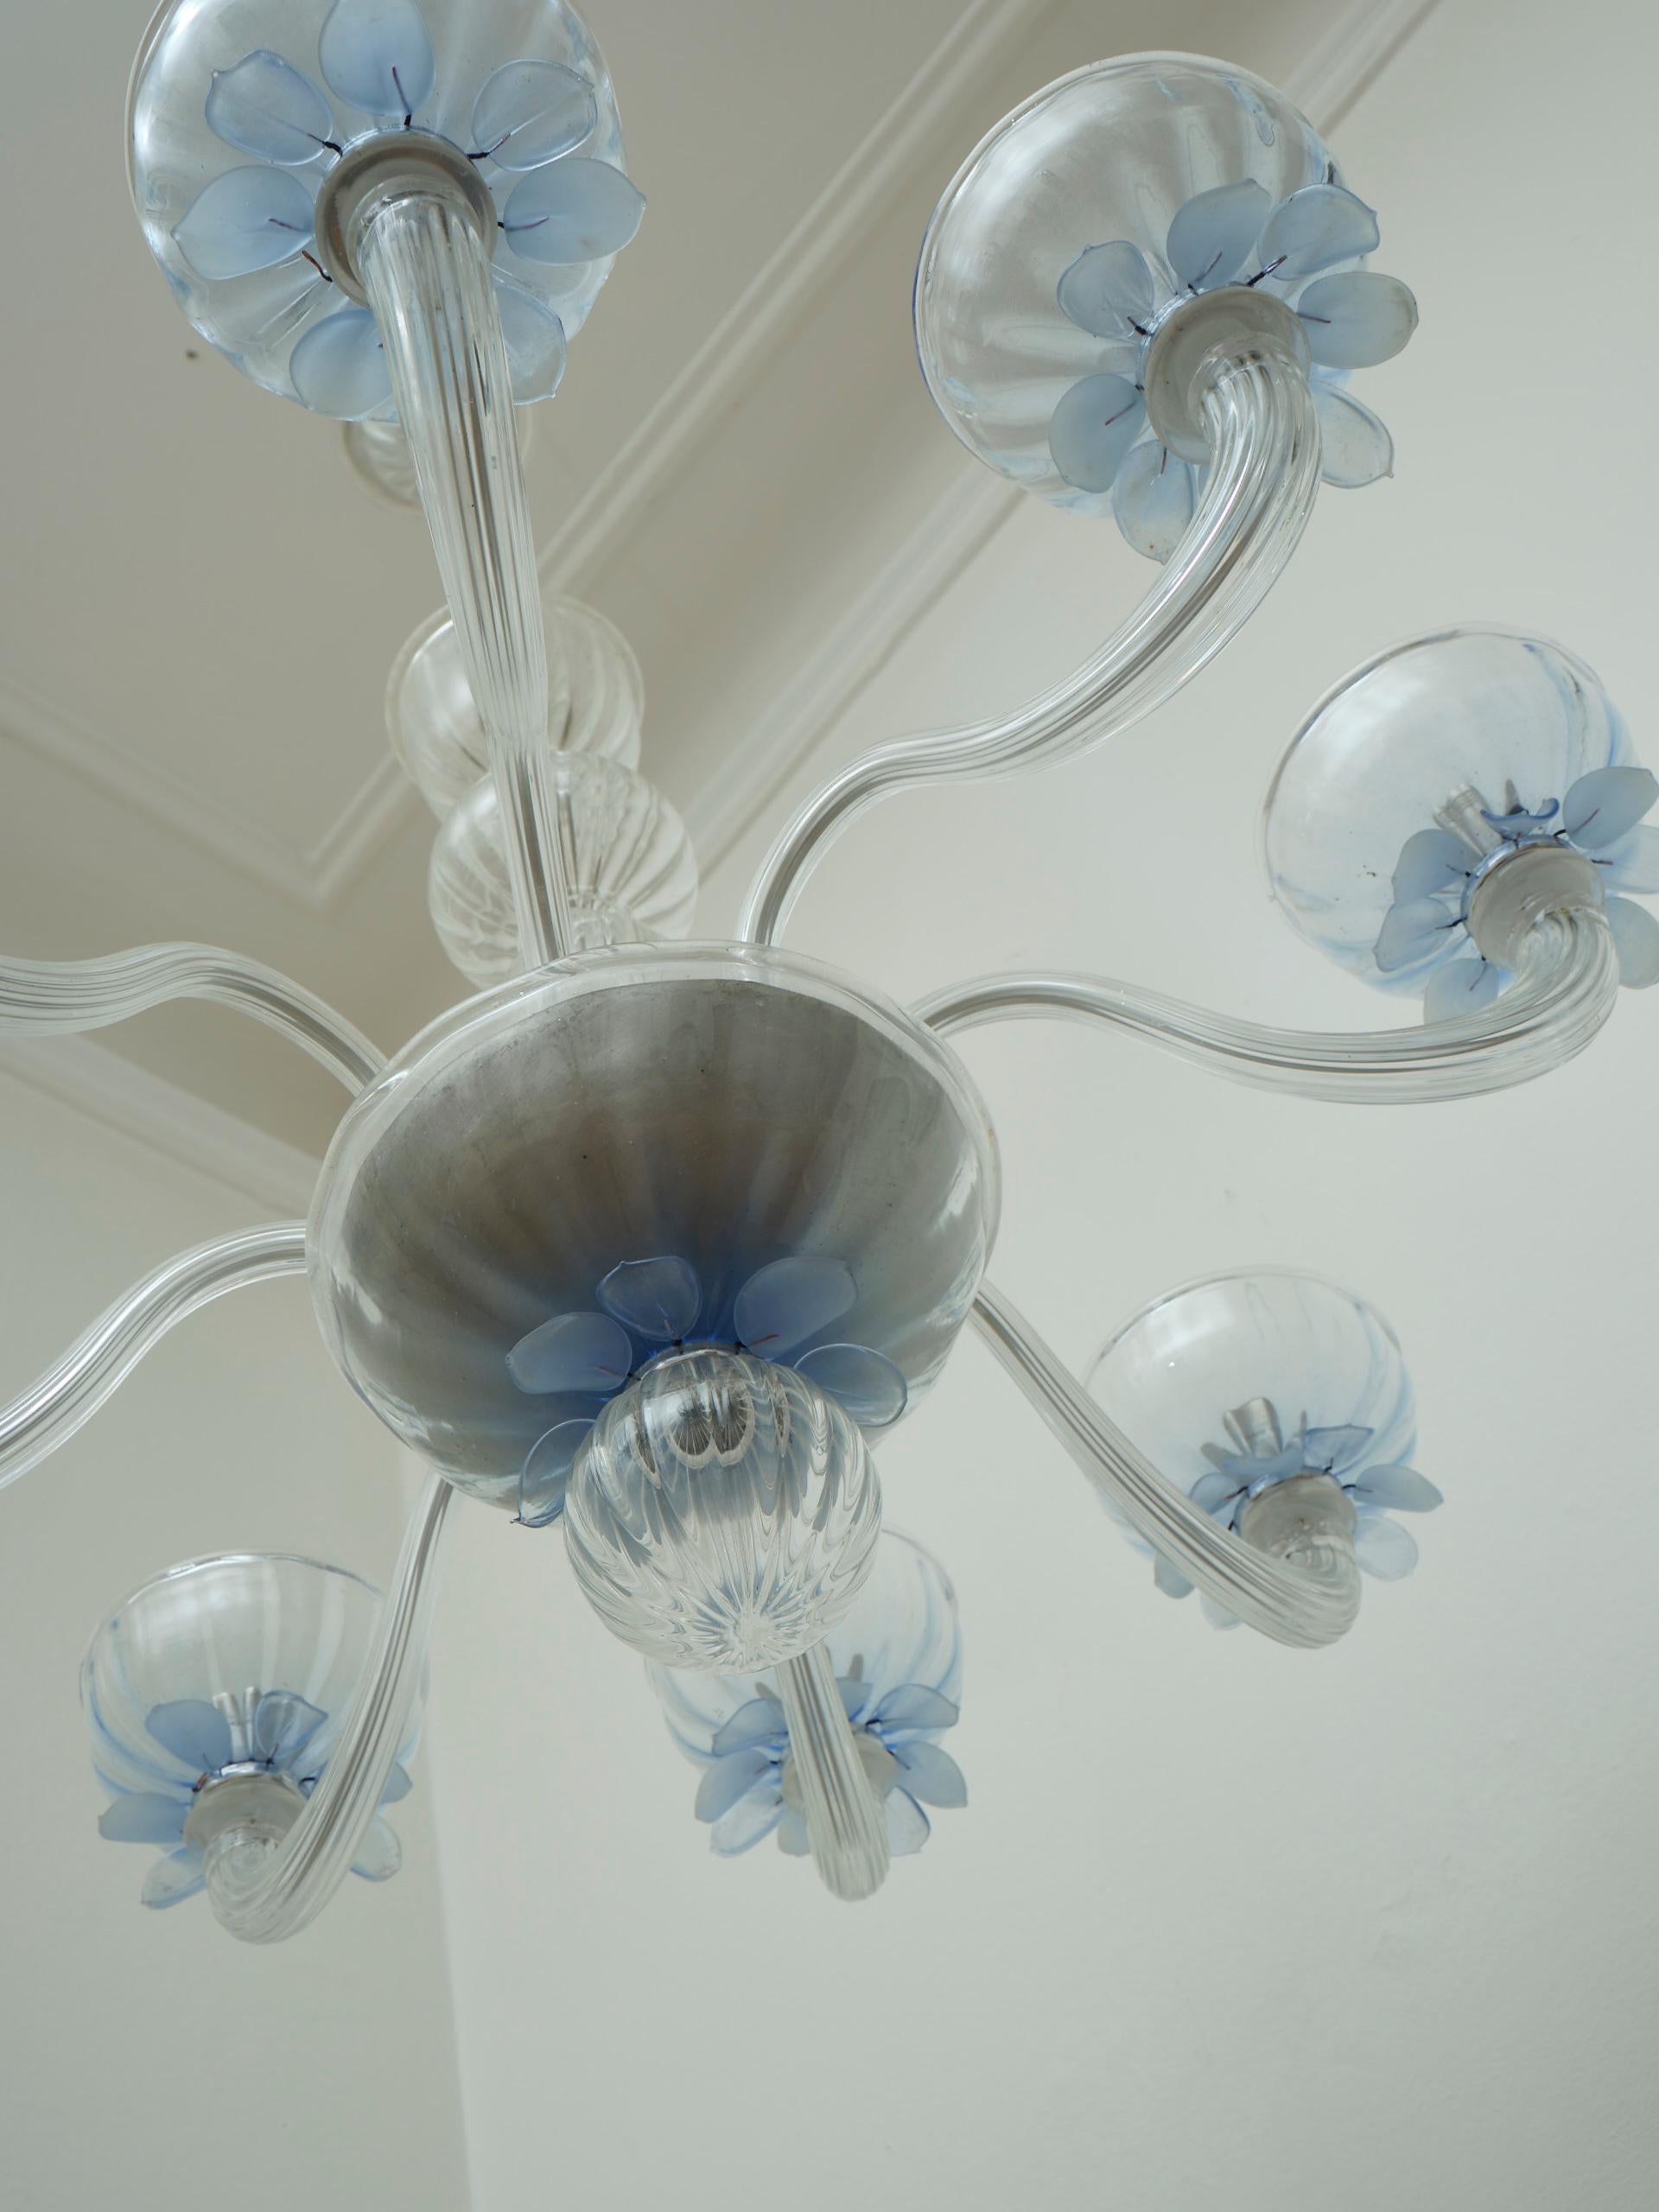 Giant European glass chandelier 8 arms blue details in the style of Murano For Sale 1